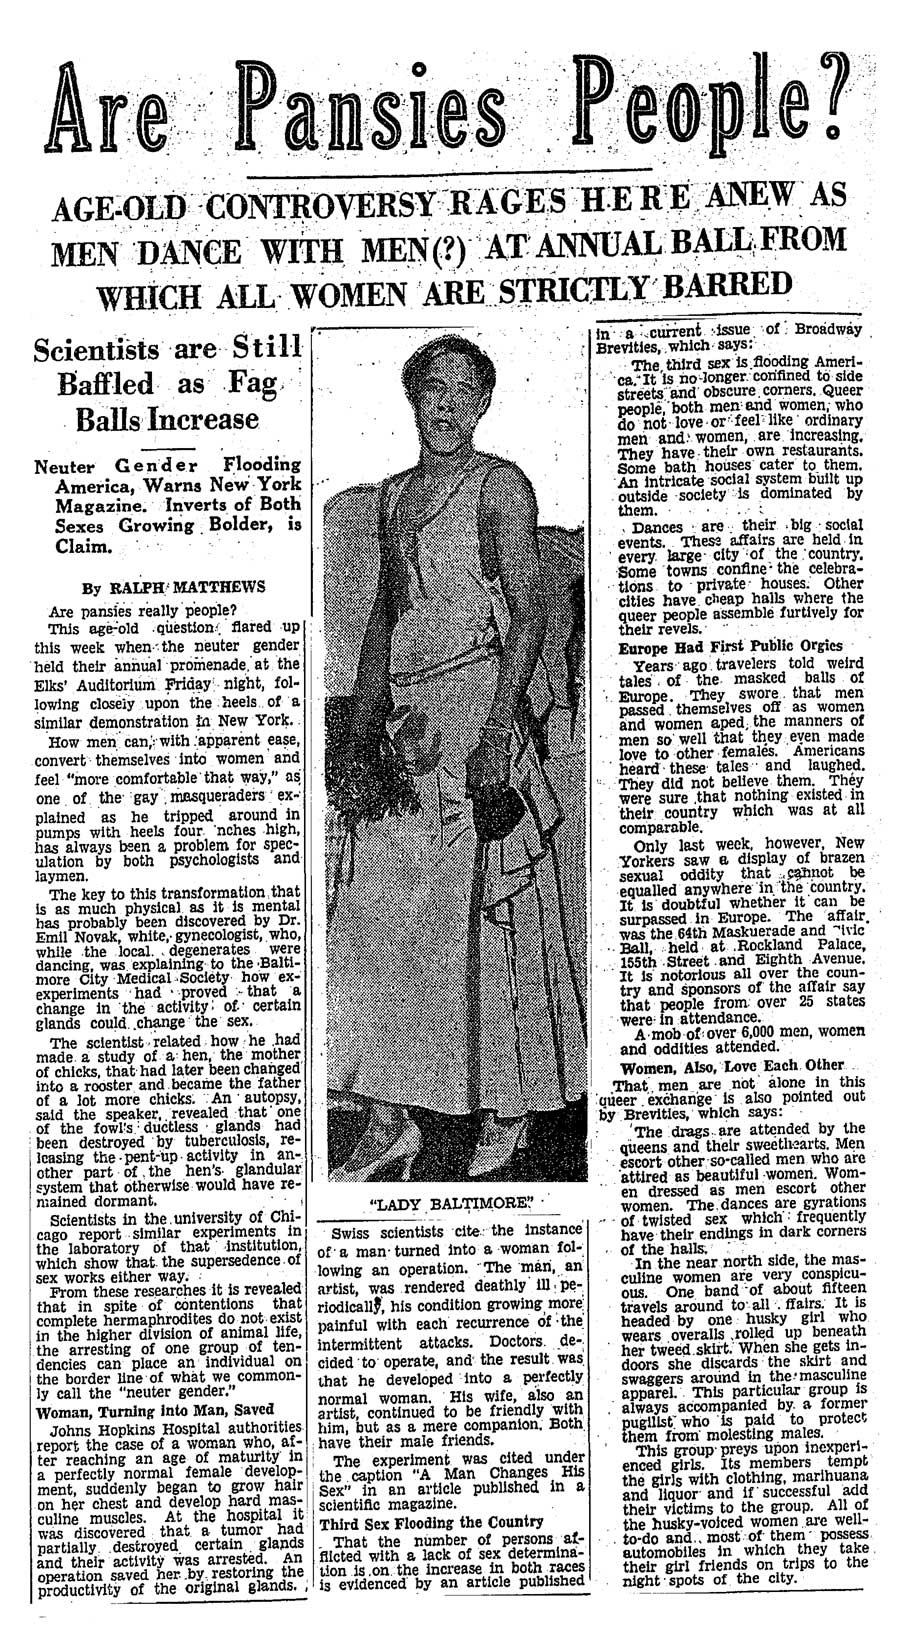 Image of a 1930s newspaper article